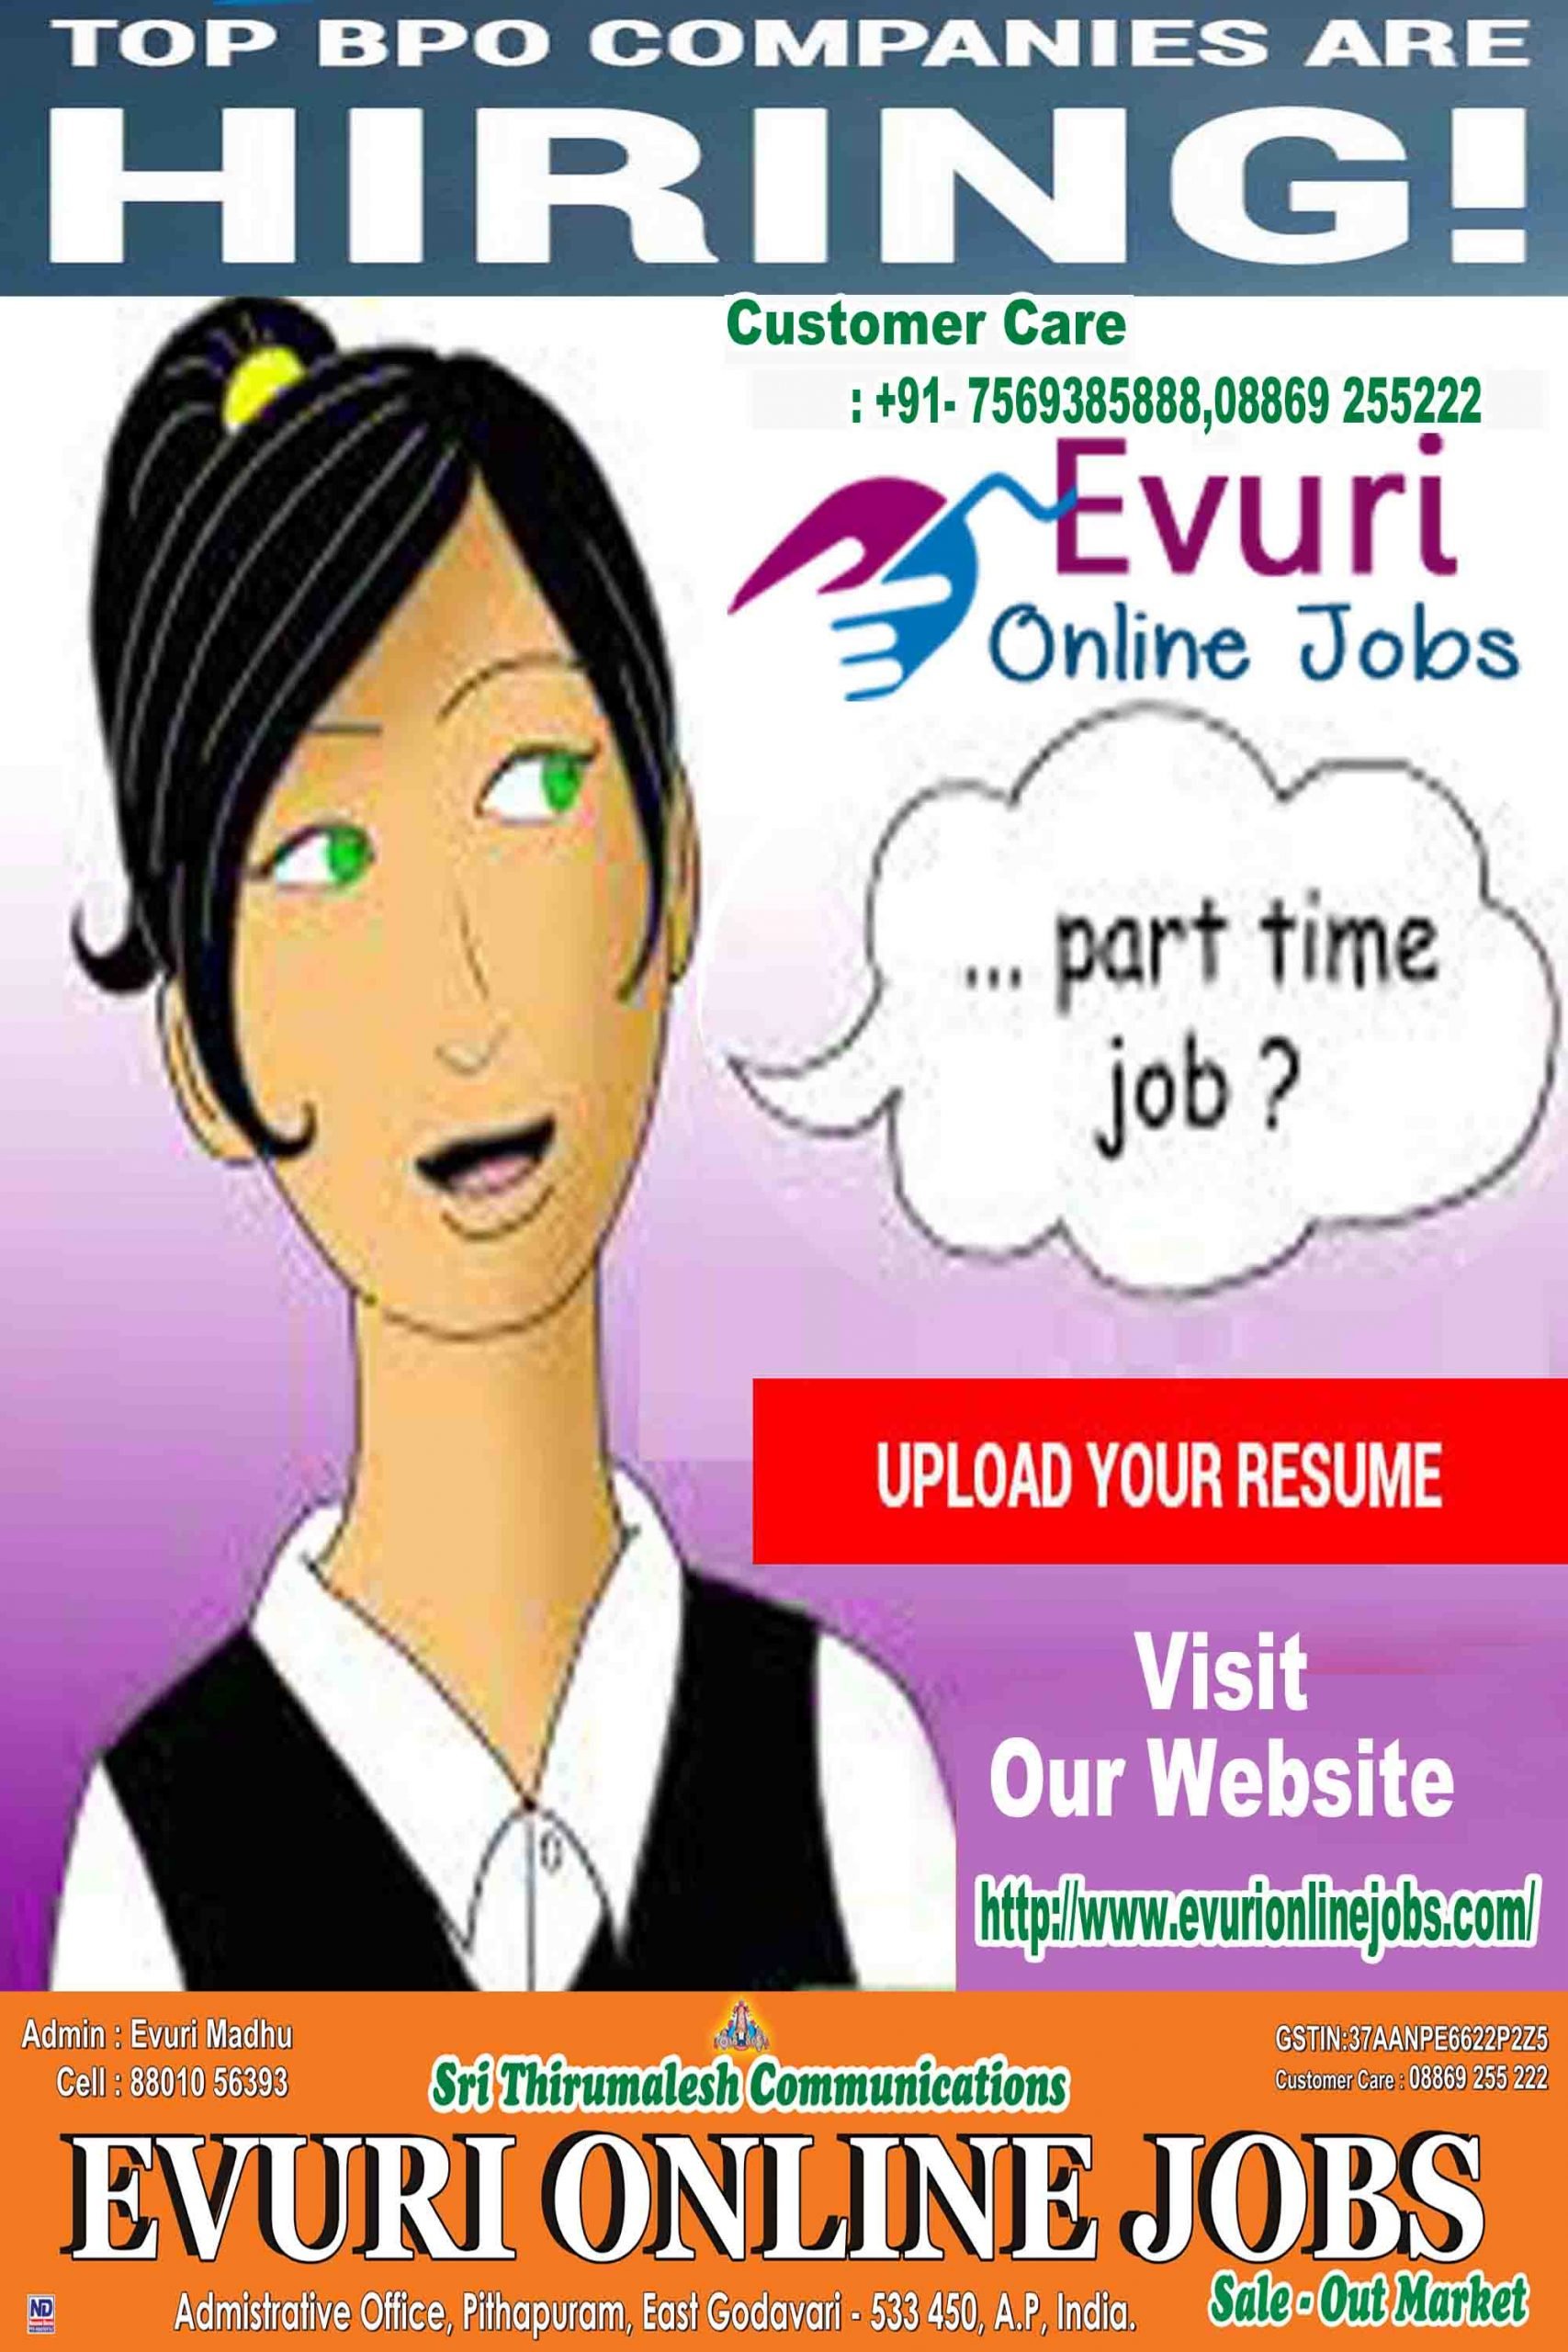 Home Based Data Entry Jobs, Part Time Jobs